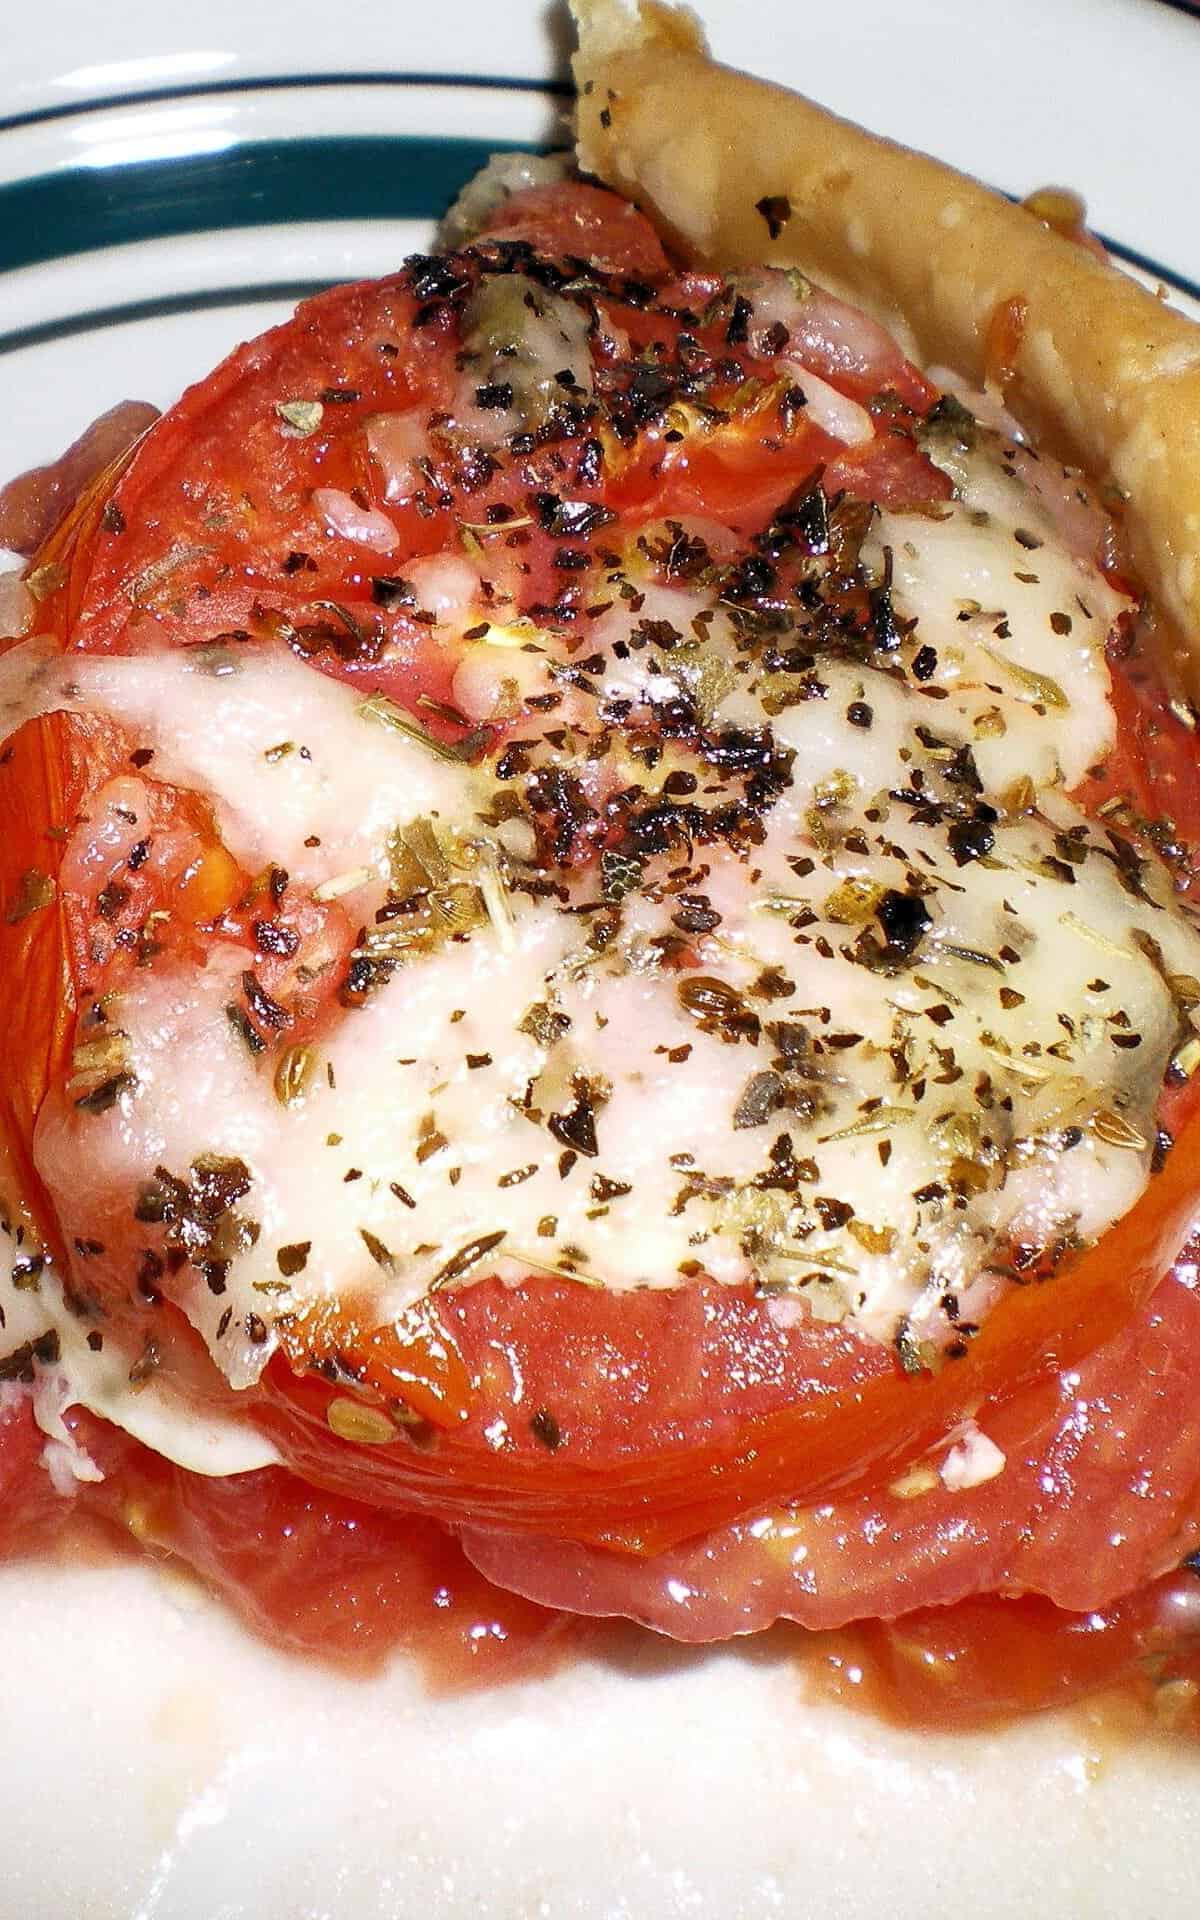  The perfect balance of tangy mustard and juicy tomatoes